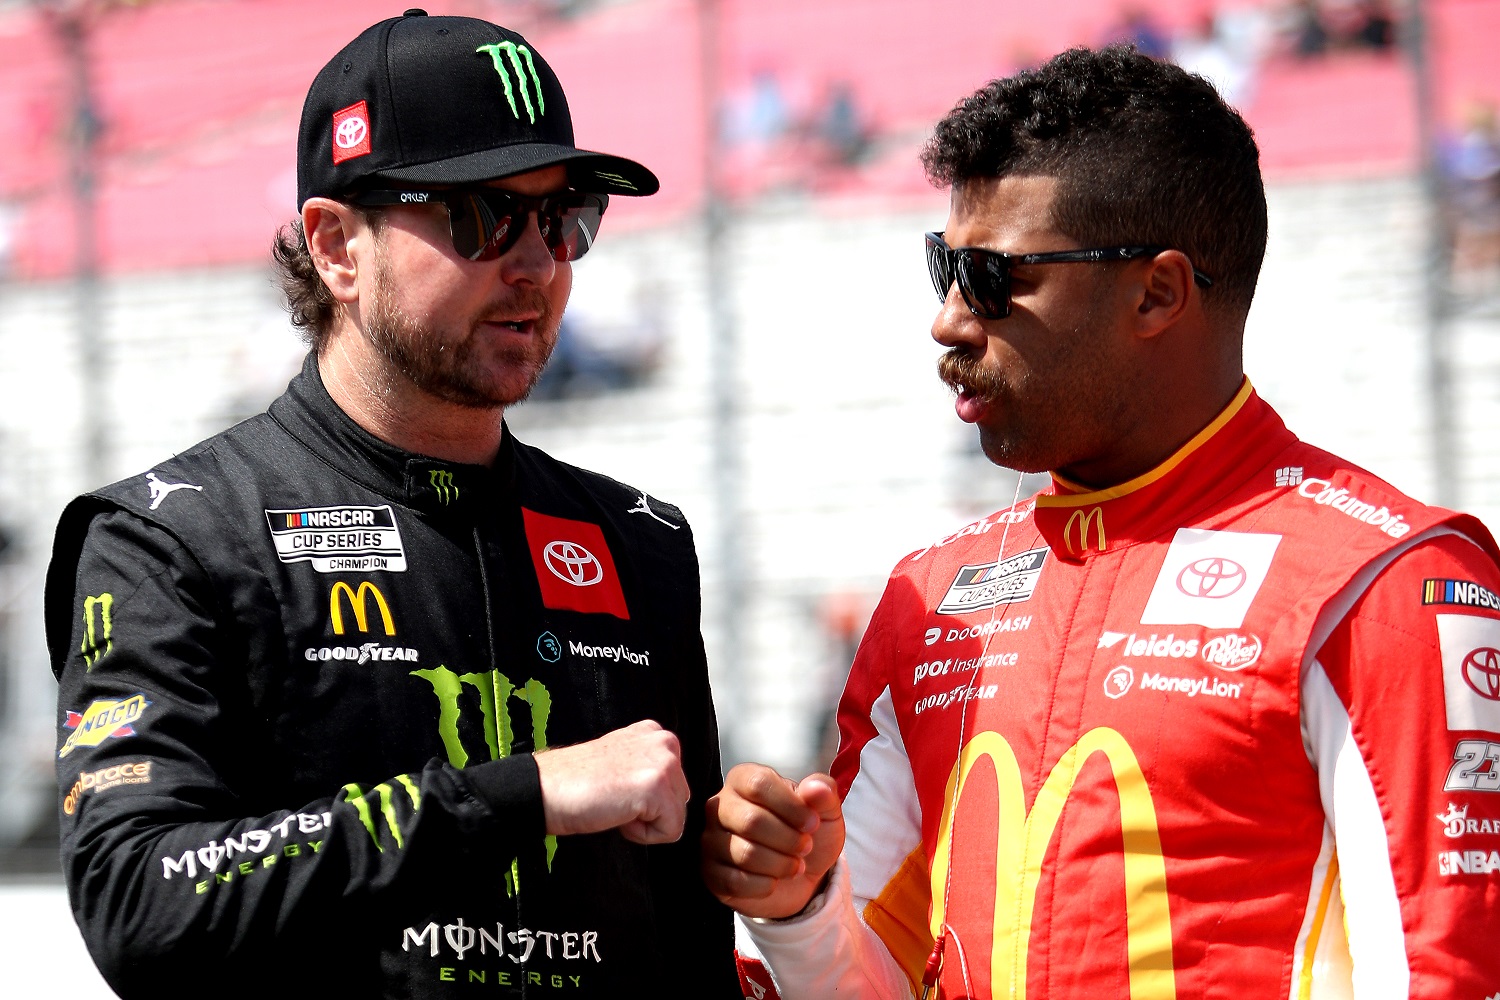 Kurt Busch and Bubba Wallace fist bump on the grid during qualifying for the NASCAR Cup Series Enjoy Illinois 300 at WWT Raceway on June 4, 2022 in Madison, Illinois. | Sean Gardner/Getty Images